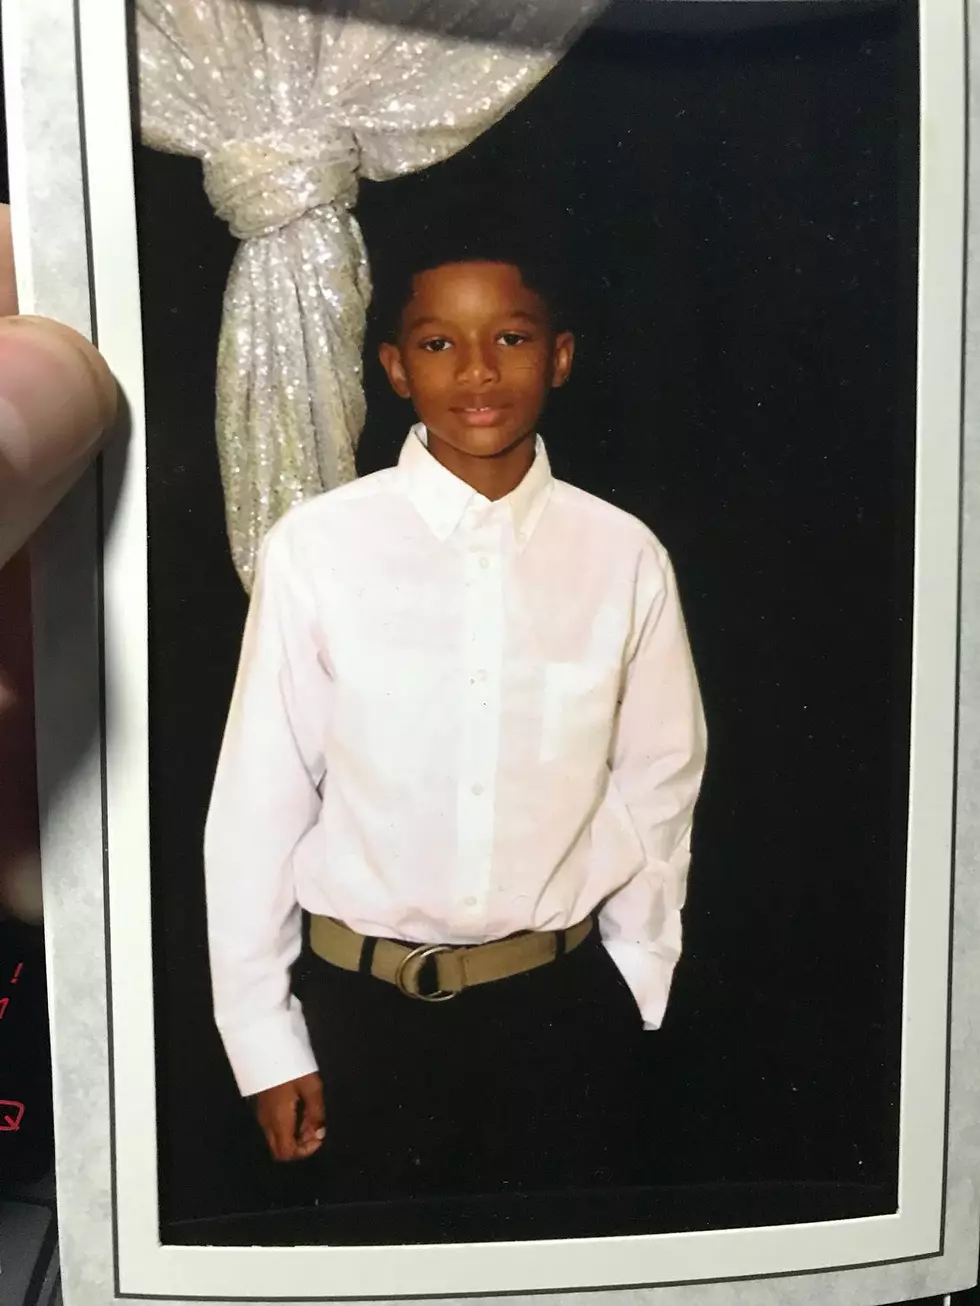 Search continues for missing 9-year old Asbury Park boy